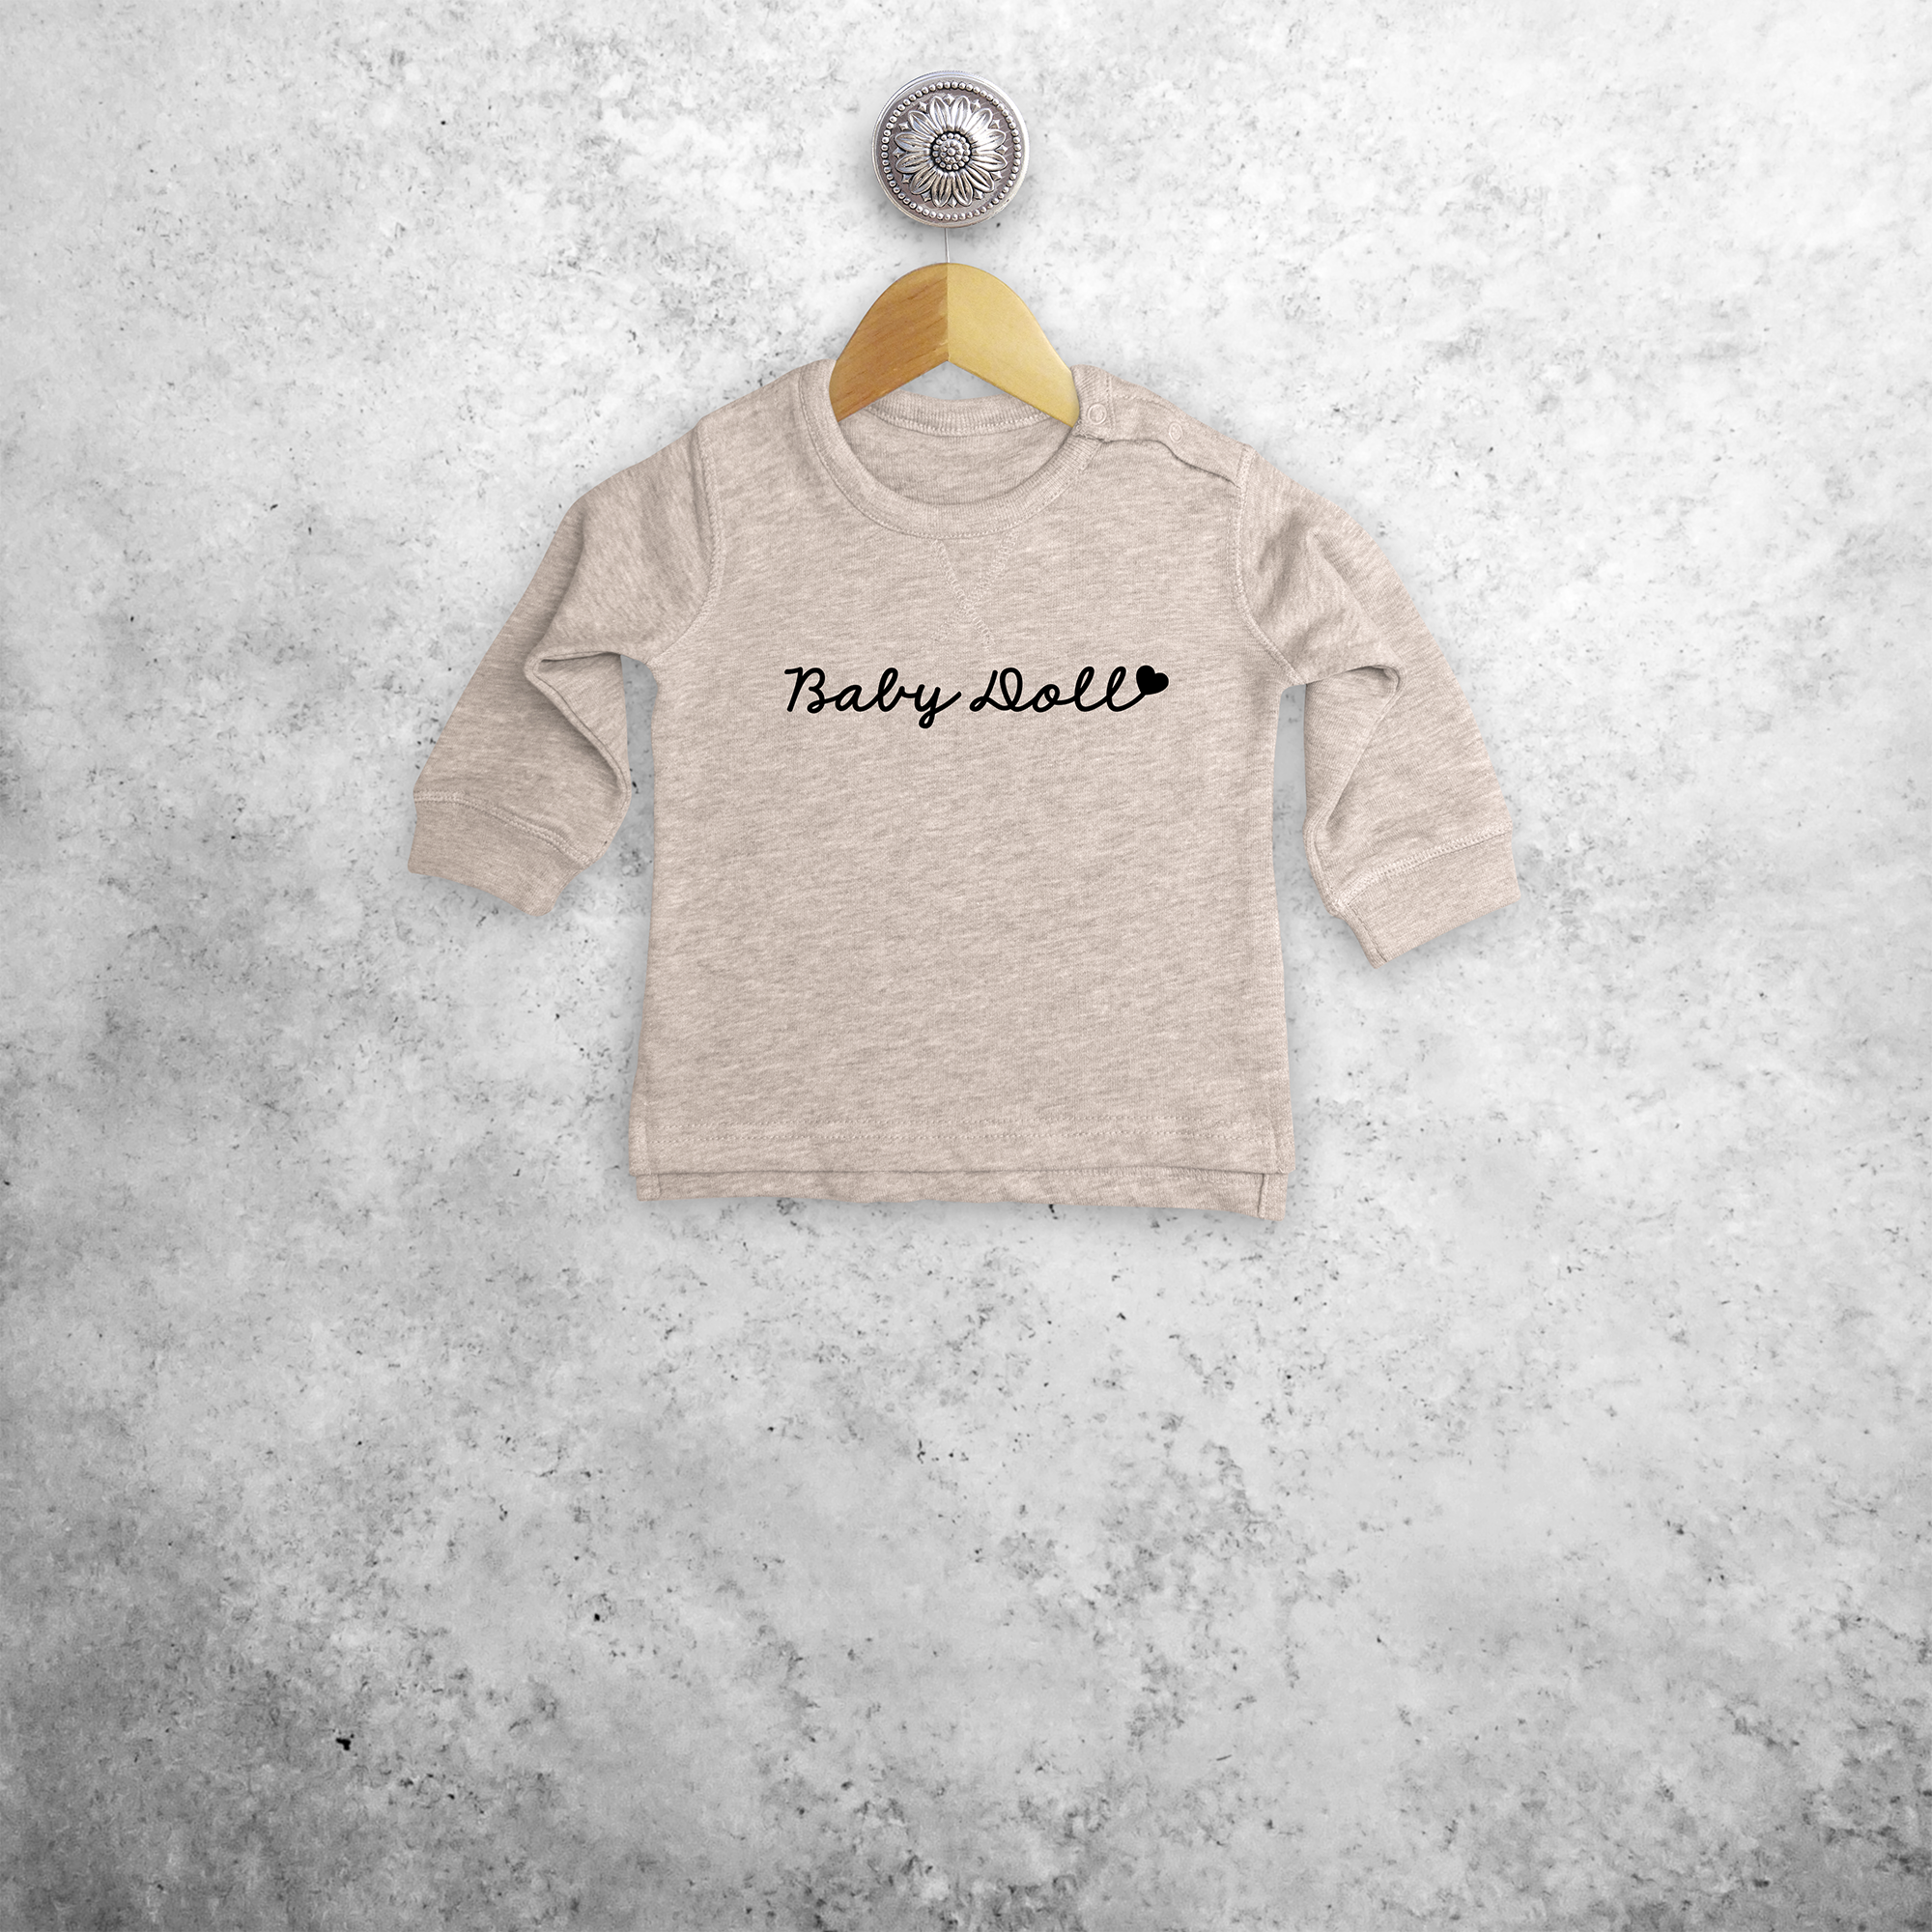 'Baby doll' baby sweater